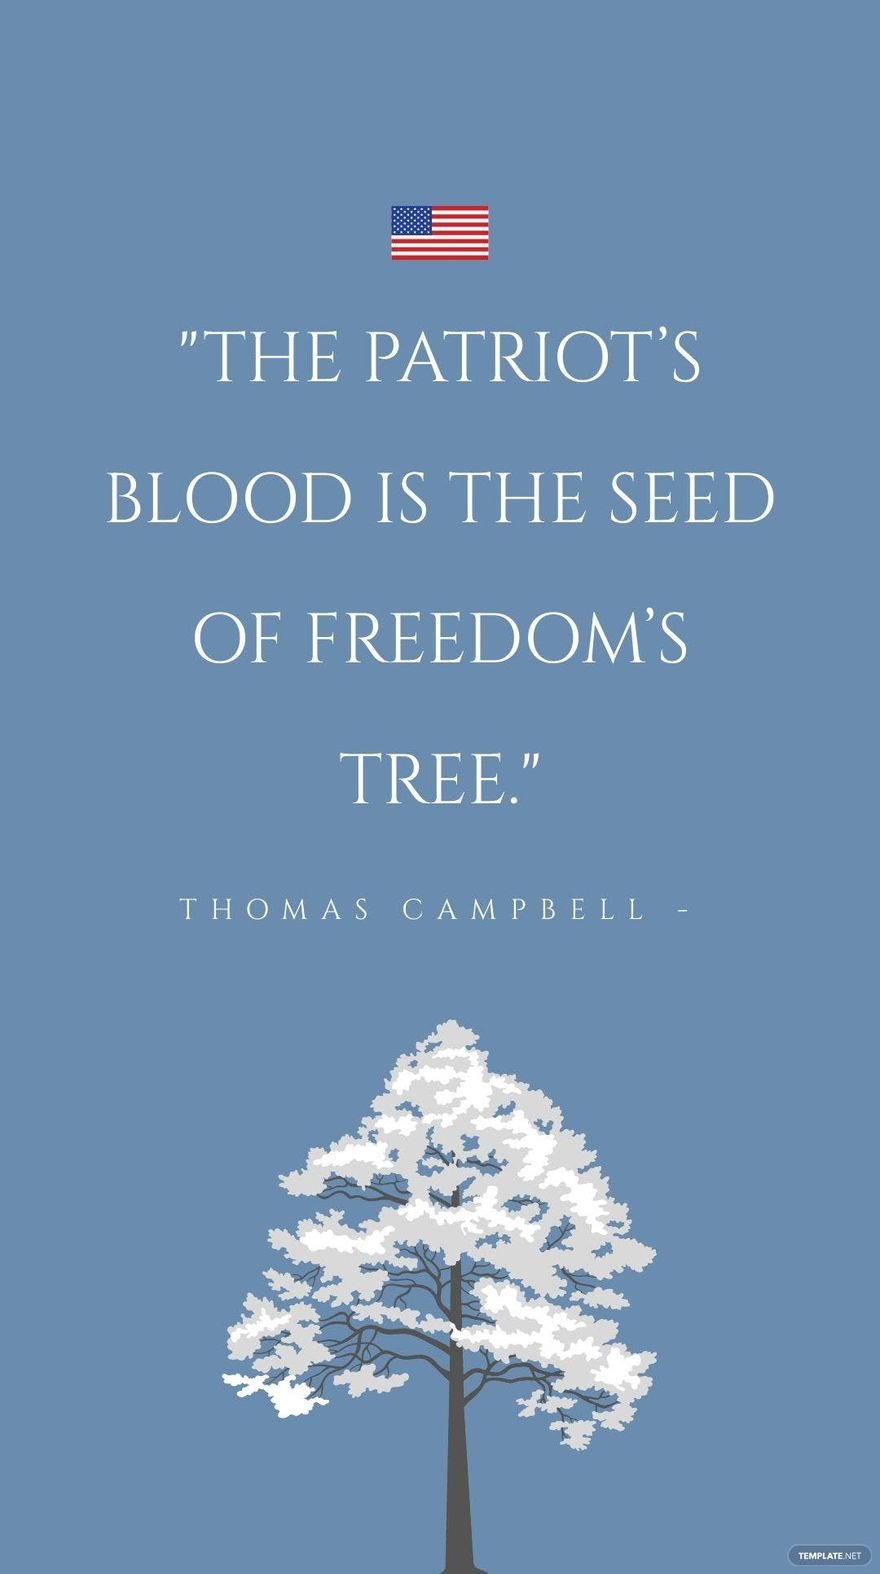 Thomas Campbell - The patriot’s blood is the seed of freedom’s tree.